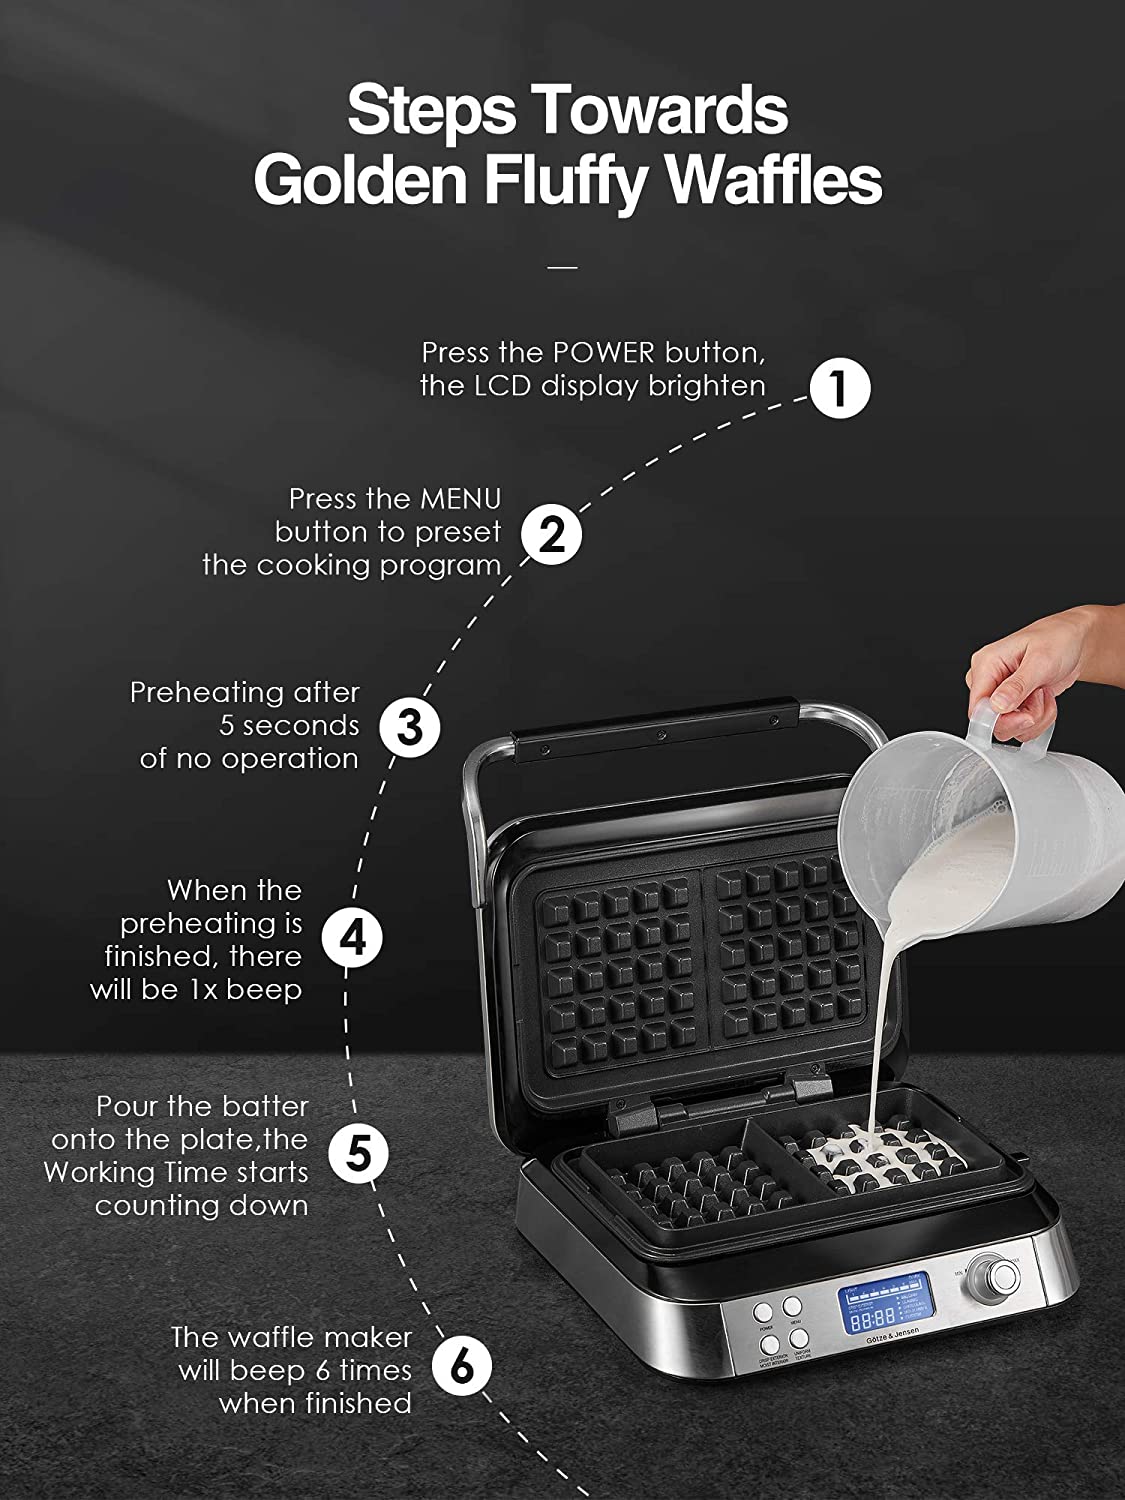 AICOOK | Waffle Maker 1600w, Smart Pro Belgian Waffle Iron with LCD Display, 2-Slice, 5 Different Programs, 7 Browning Levels, Recipe Included, Silver, Steps Towards Golden Fluffy Waffles